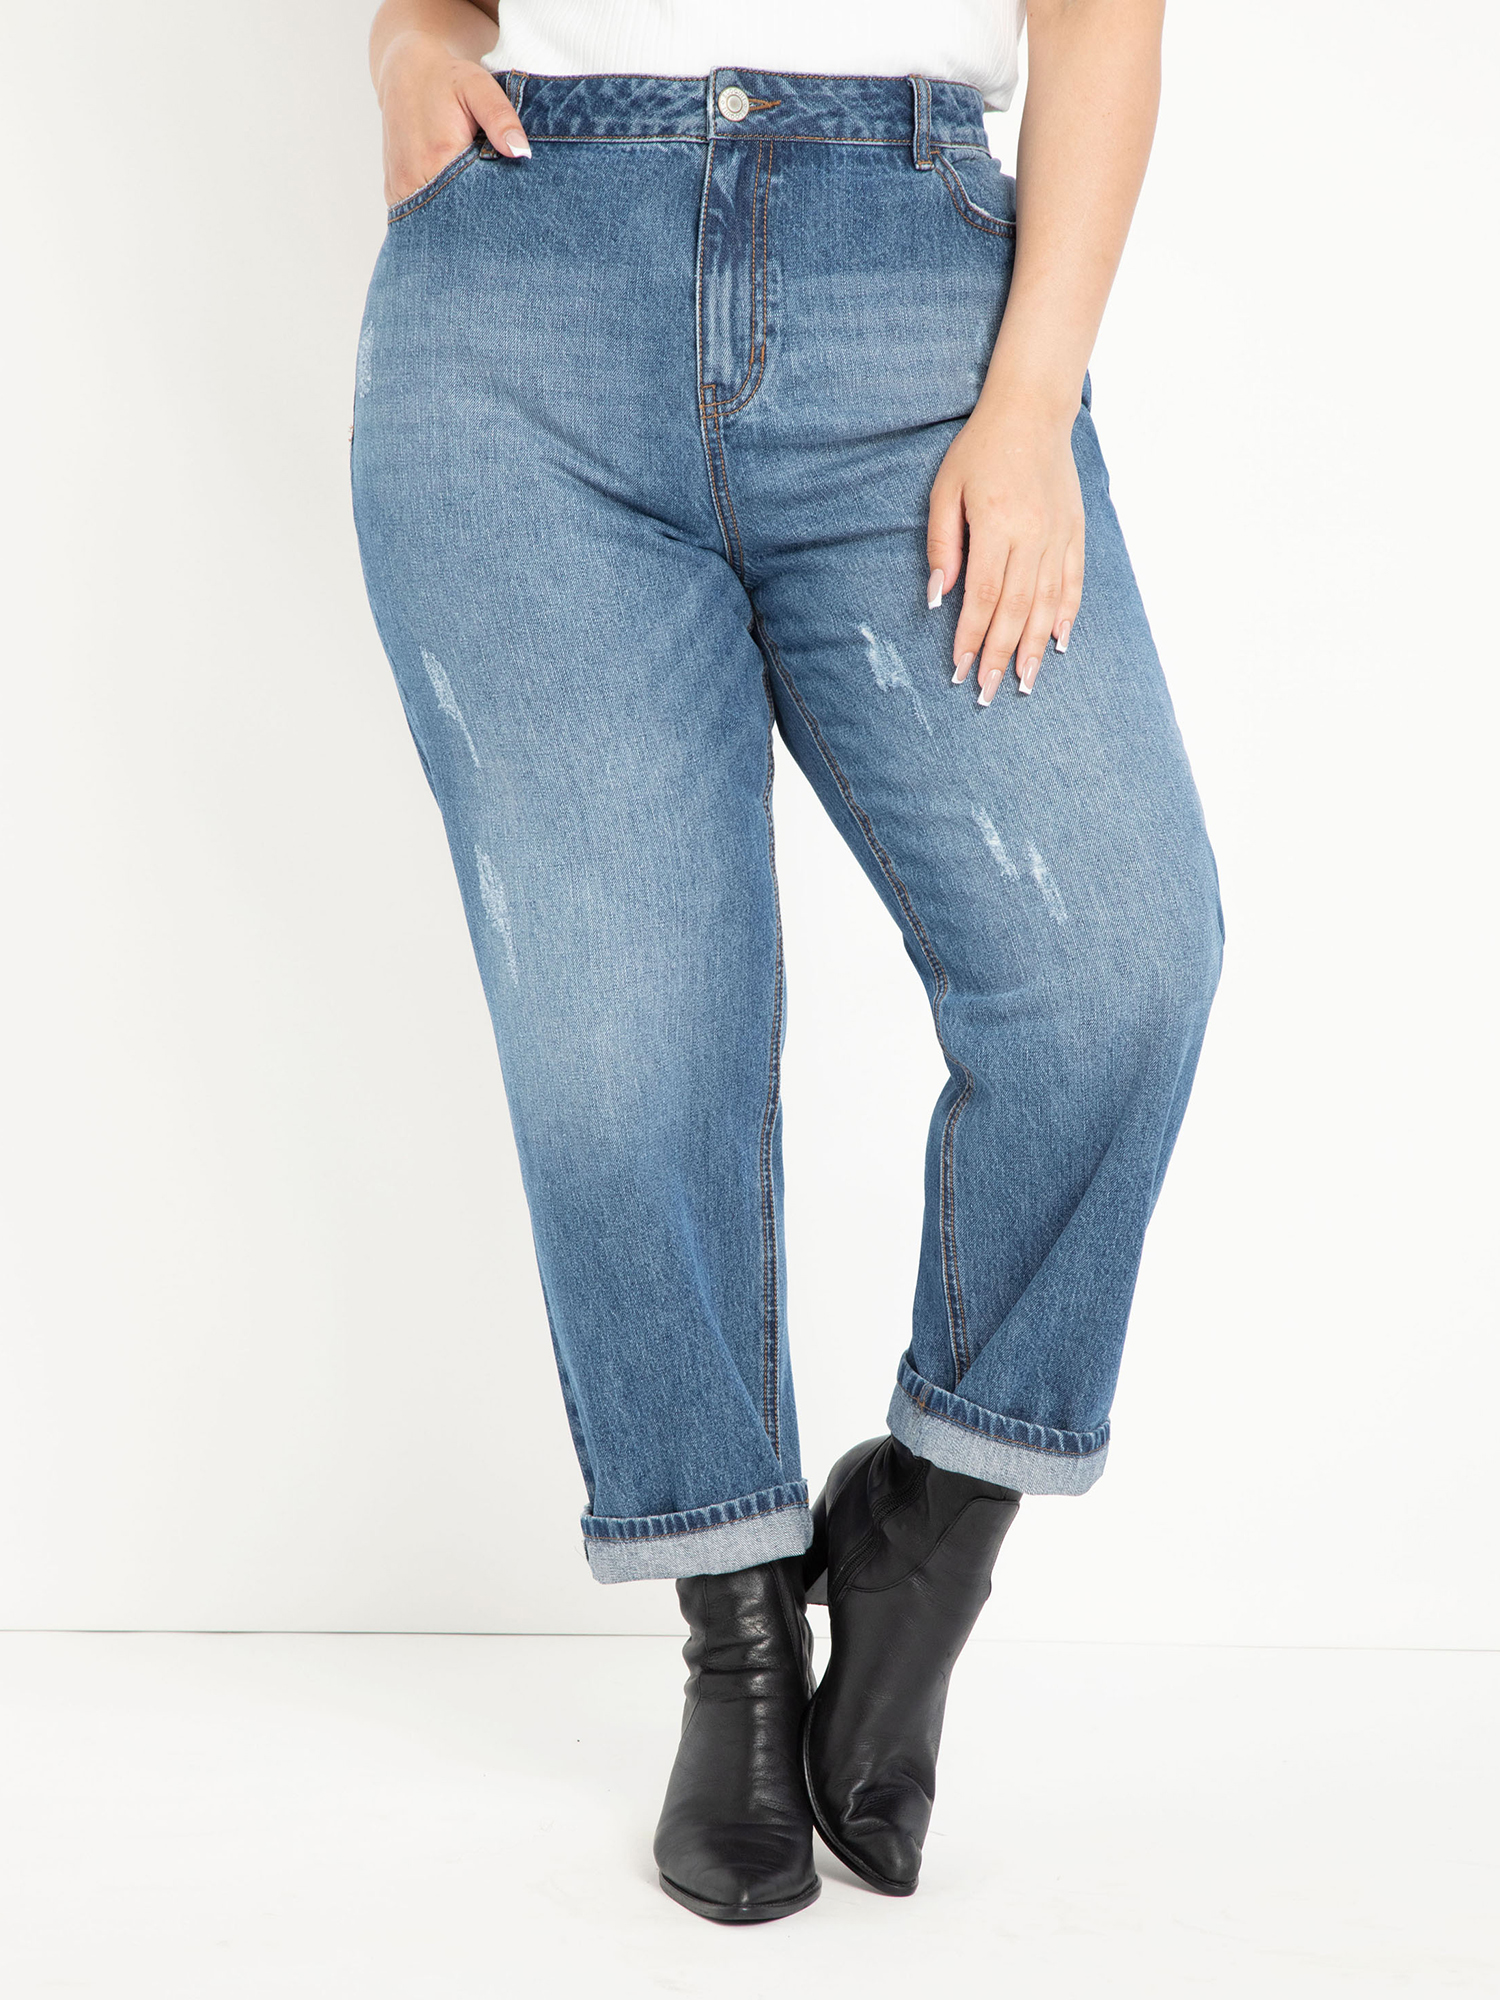 ELOQUII Elements Plus Size Distressed Mom Jeans - image 1 of 3